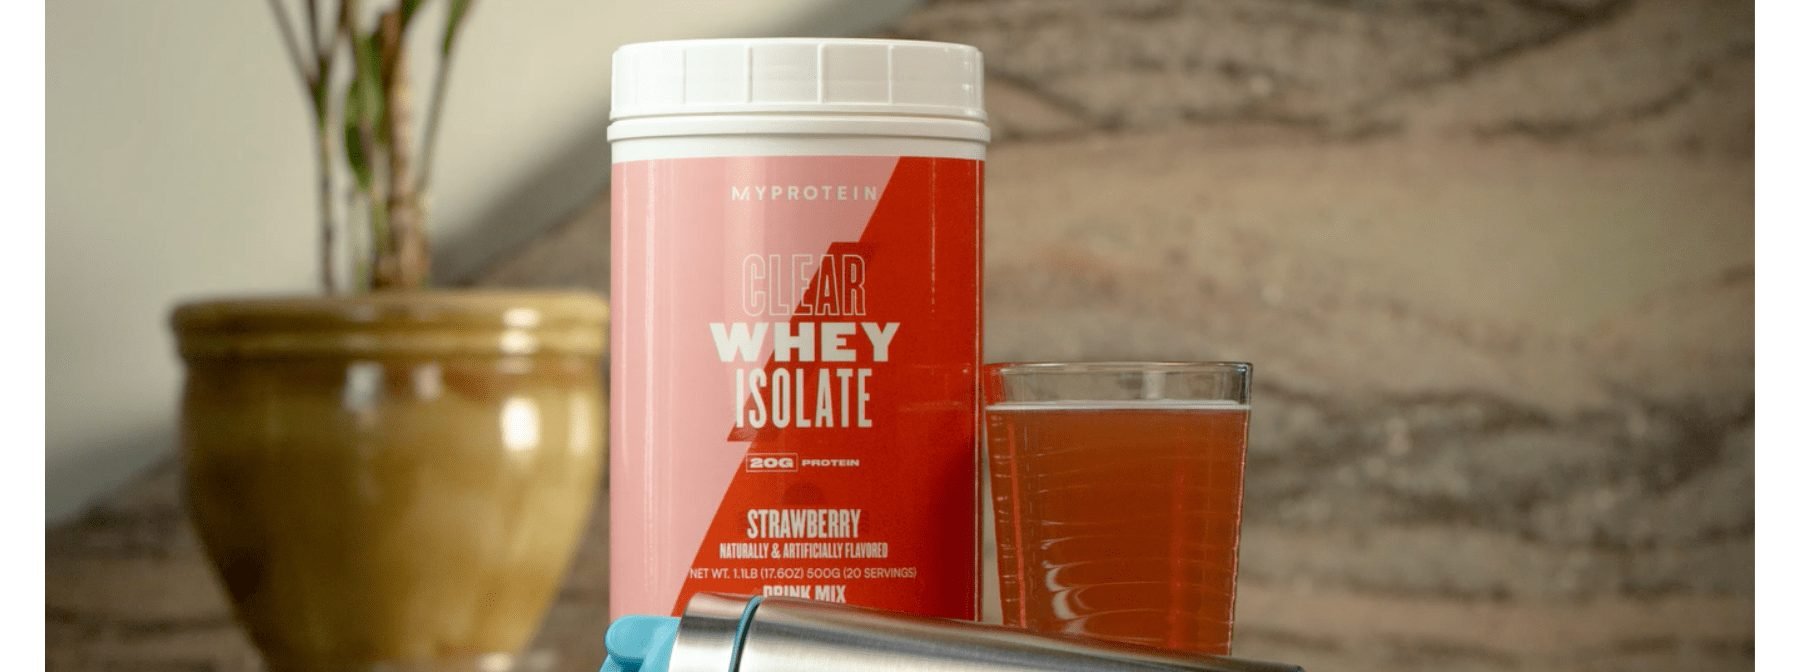 Check Out These Refreshing Flavors of Clear Whey Isolate | Our Clear Protein Drinks & Juices